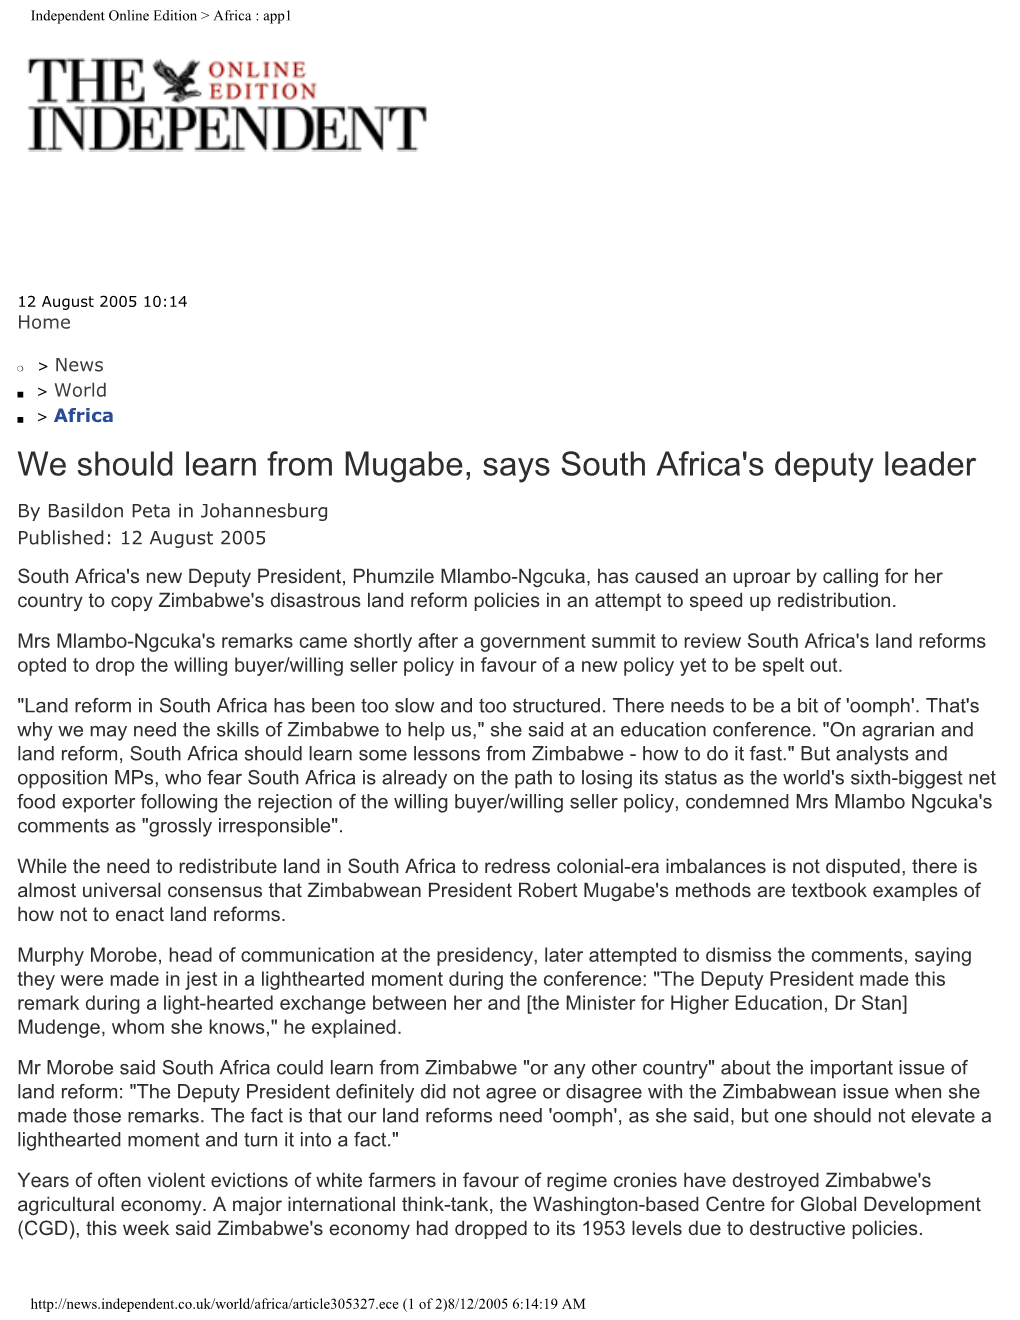 We Should Learn from Mugabe, Says South Africa's Deputy Leader by Basildon Peta in Johannesburg Published: 12 August 2005